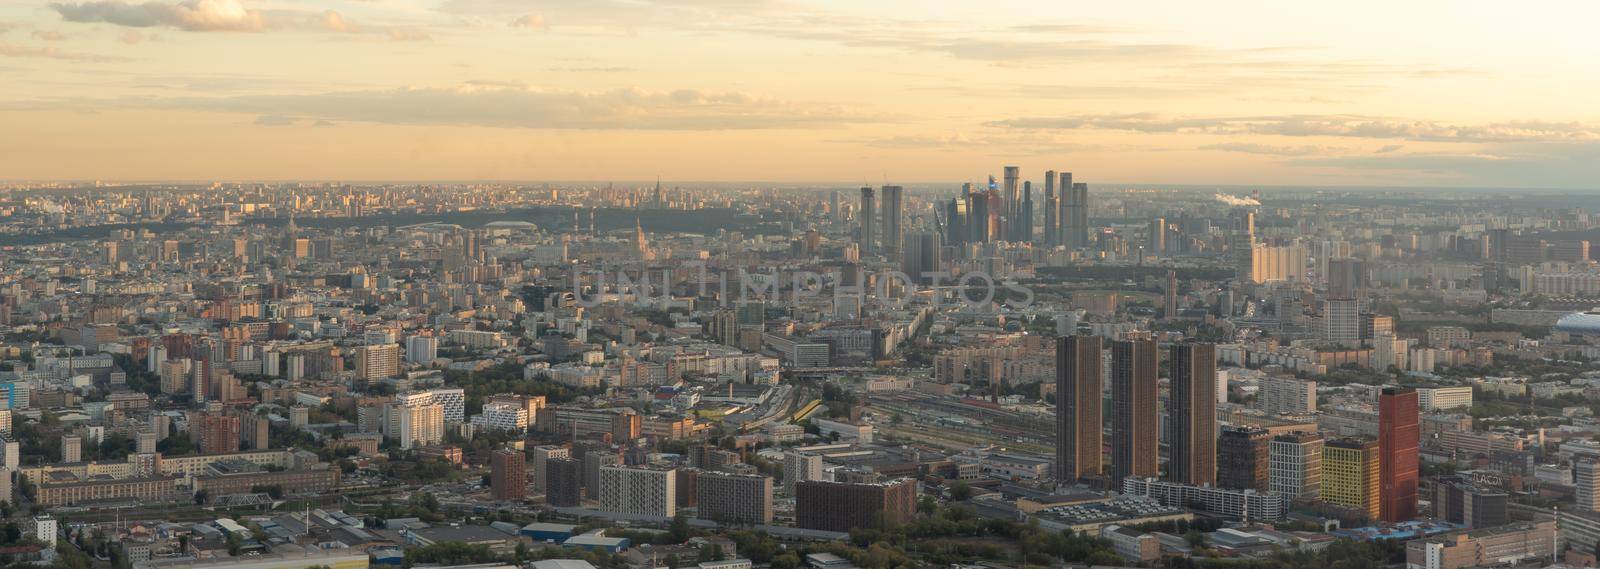 Moscow aerial panorama. Moscow city view. Skyscrapers in the center of the capital. Panorama of the Russian city during sunset. Russian architecture